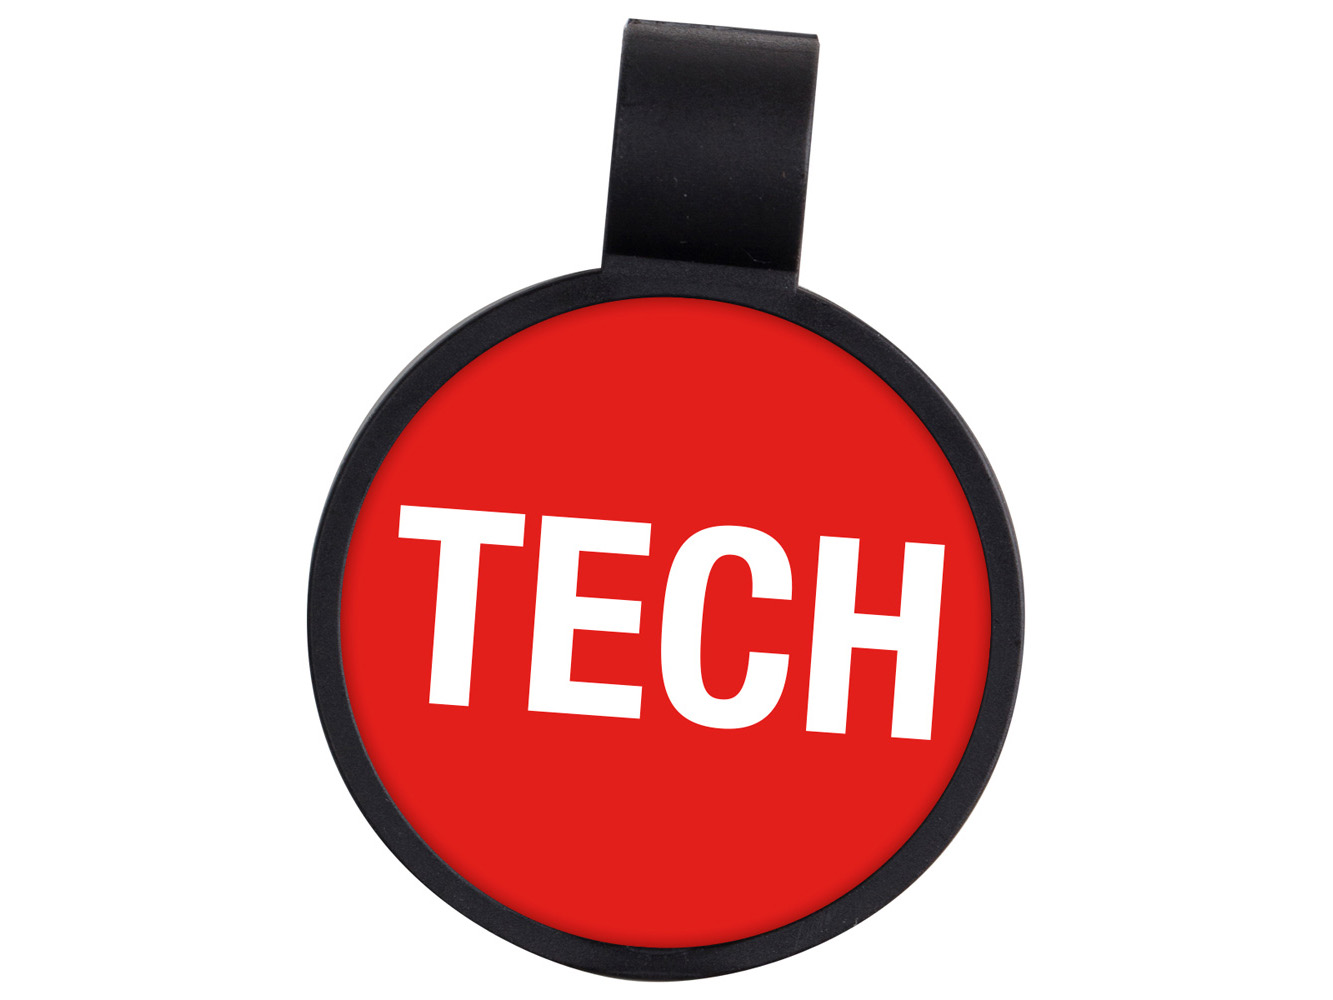 STP19: TECH – Technician (Red 485C) Anti-Microbial Position Stethoscope ID Tag